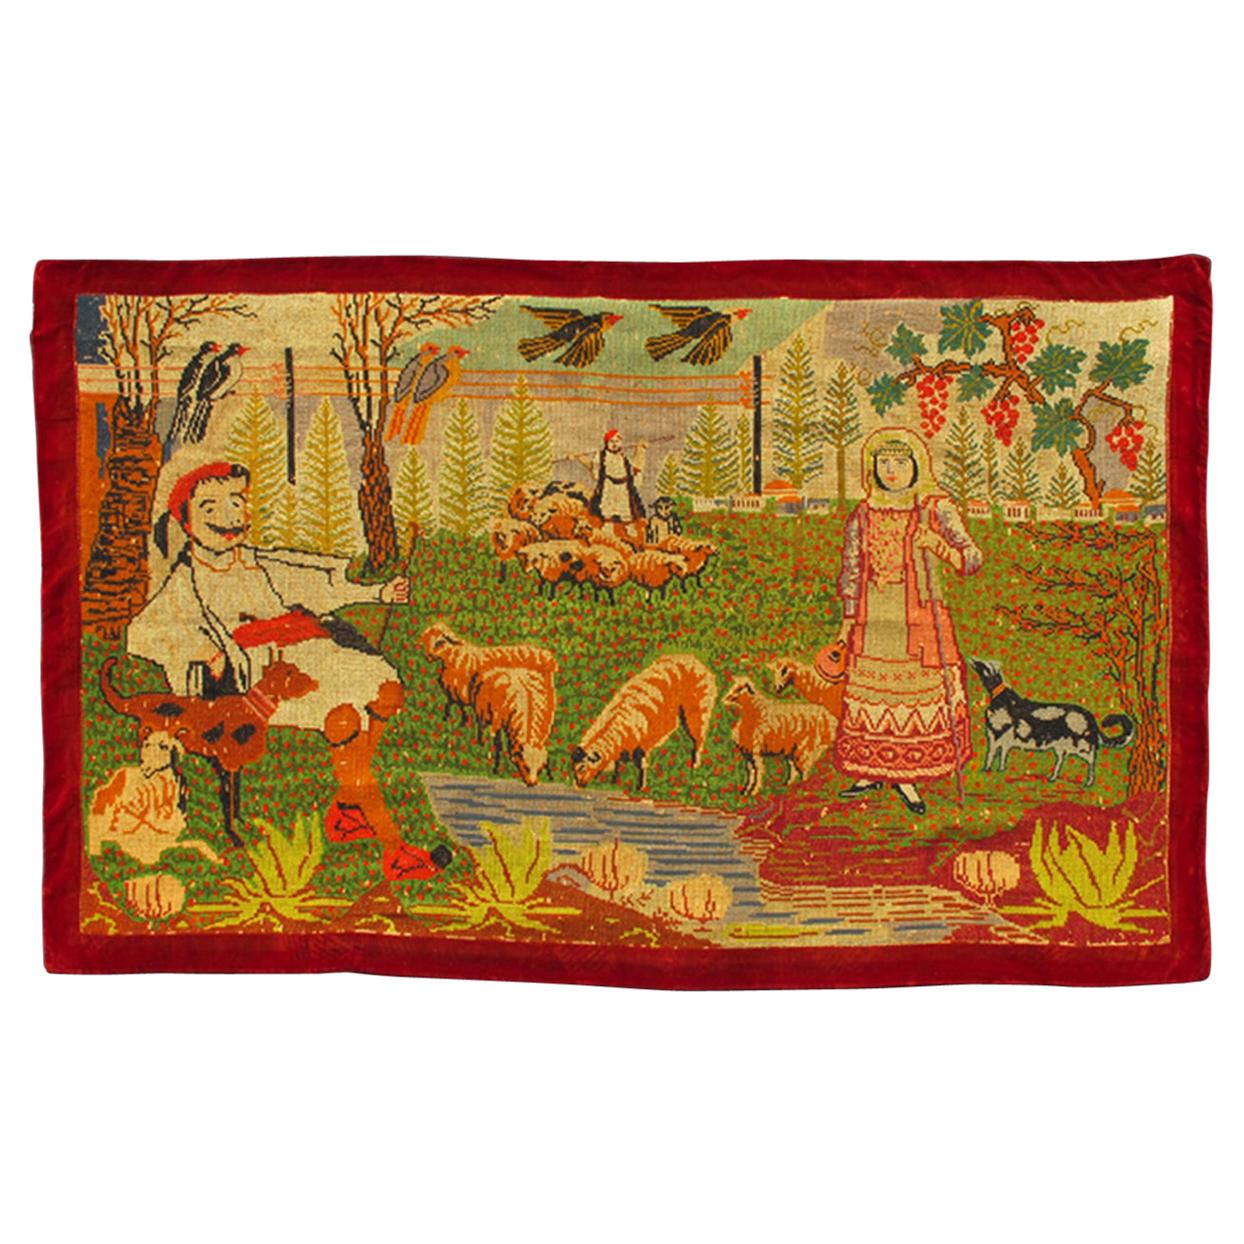 Antique European Folk Art Tapestry with Country Side Scene in Bright Colors